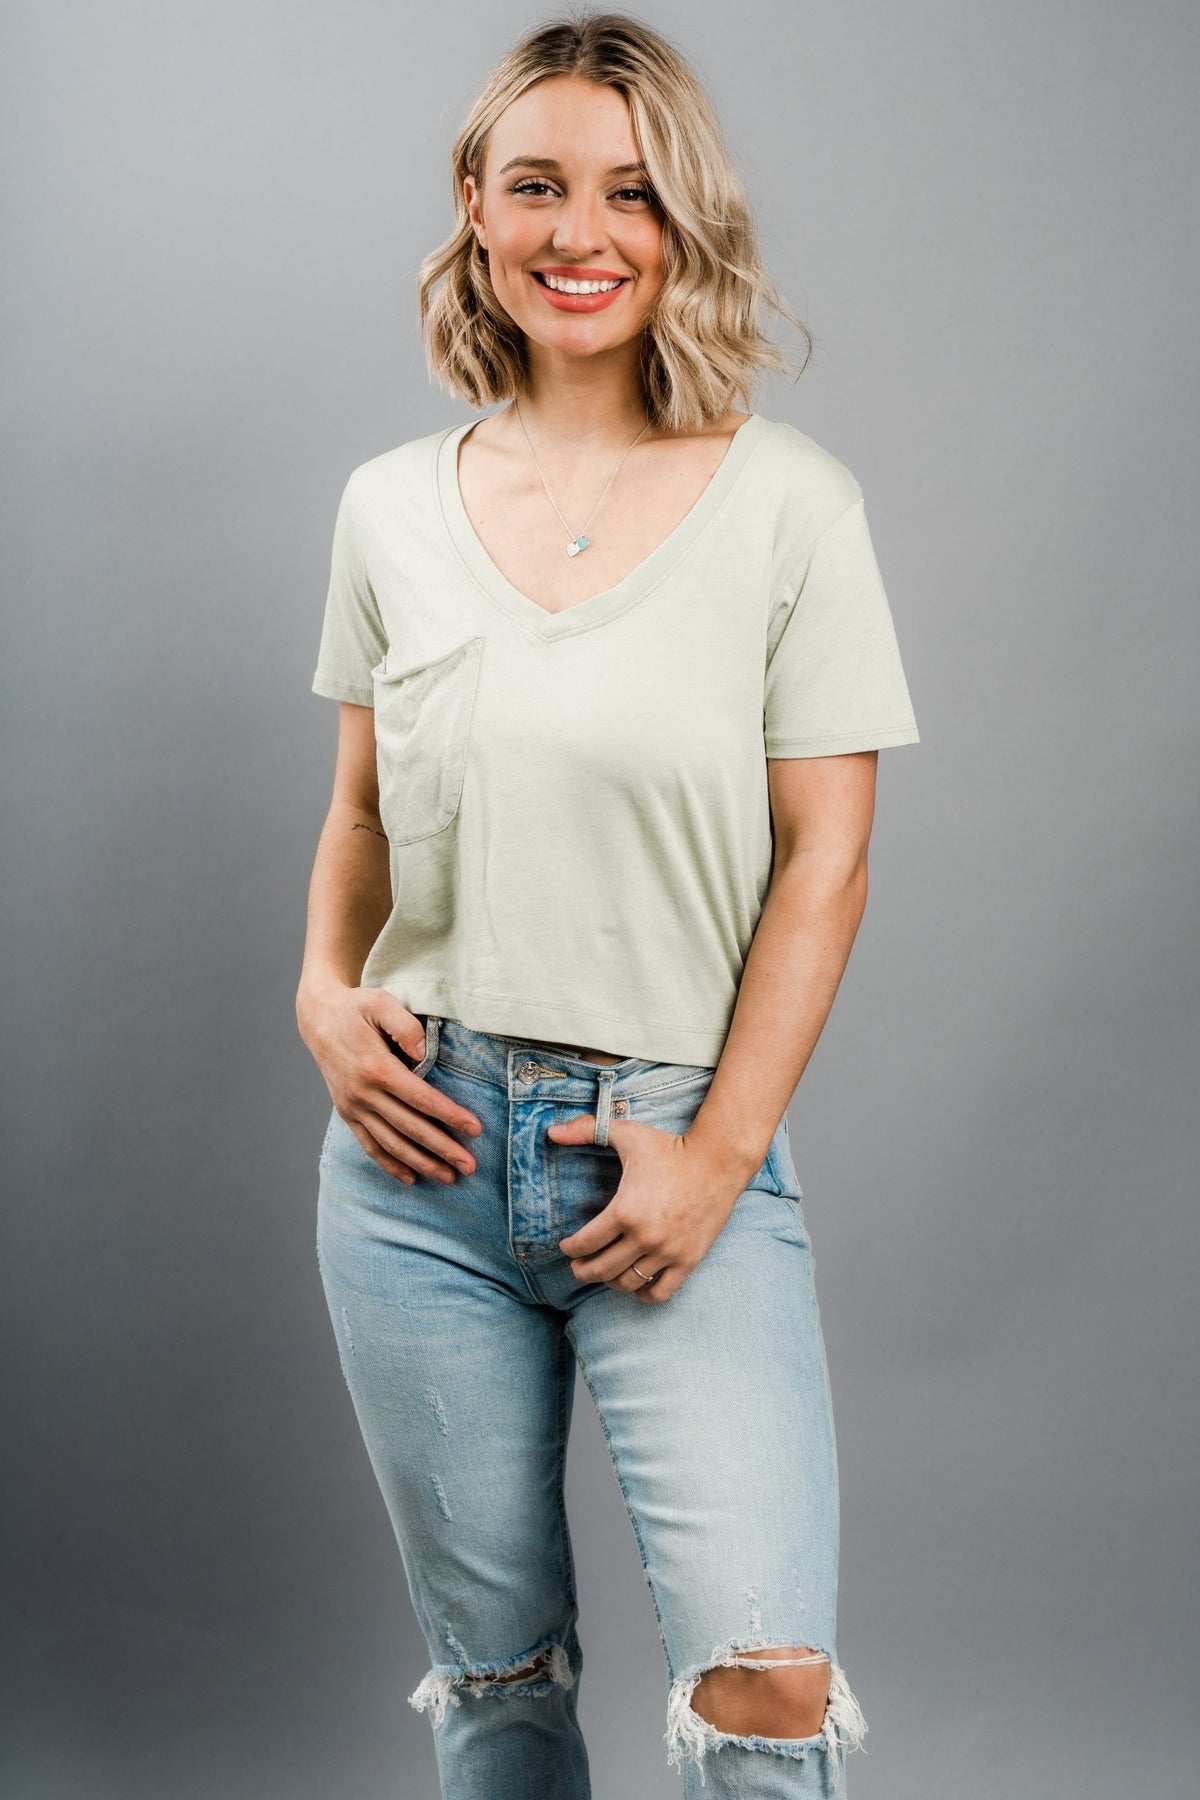 Z Supply skimmer pocket tee pistachio - Z Supply T-shirts - Z Supply Tops, Dresses, Tanks, Tees, Cardigans, Joggers and Loungewear at Lush Fashion Lounge